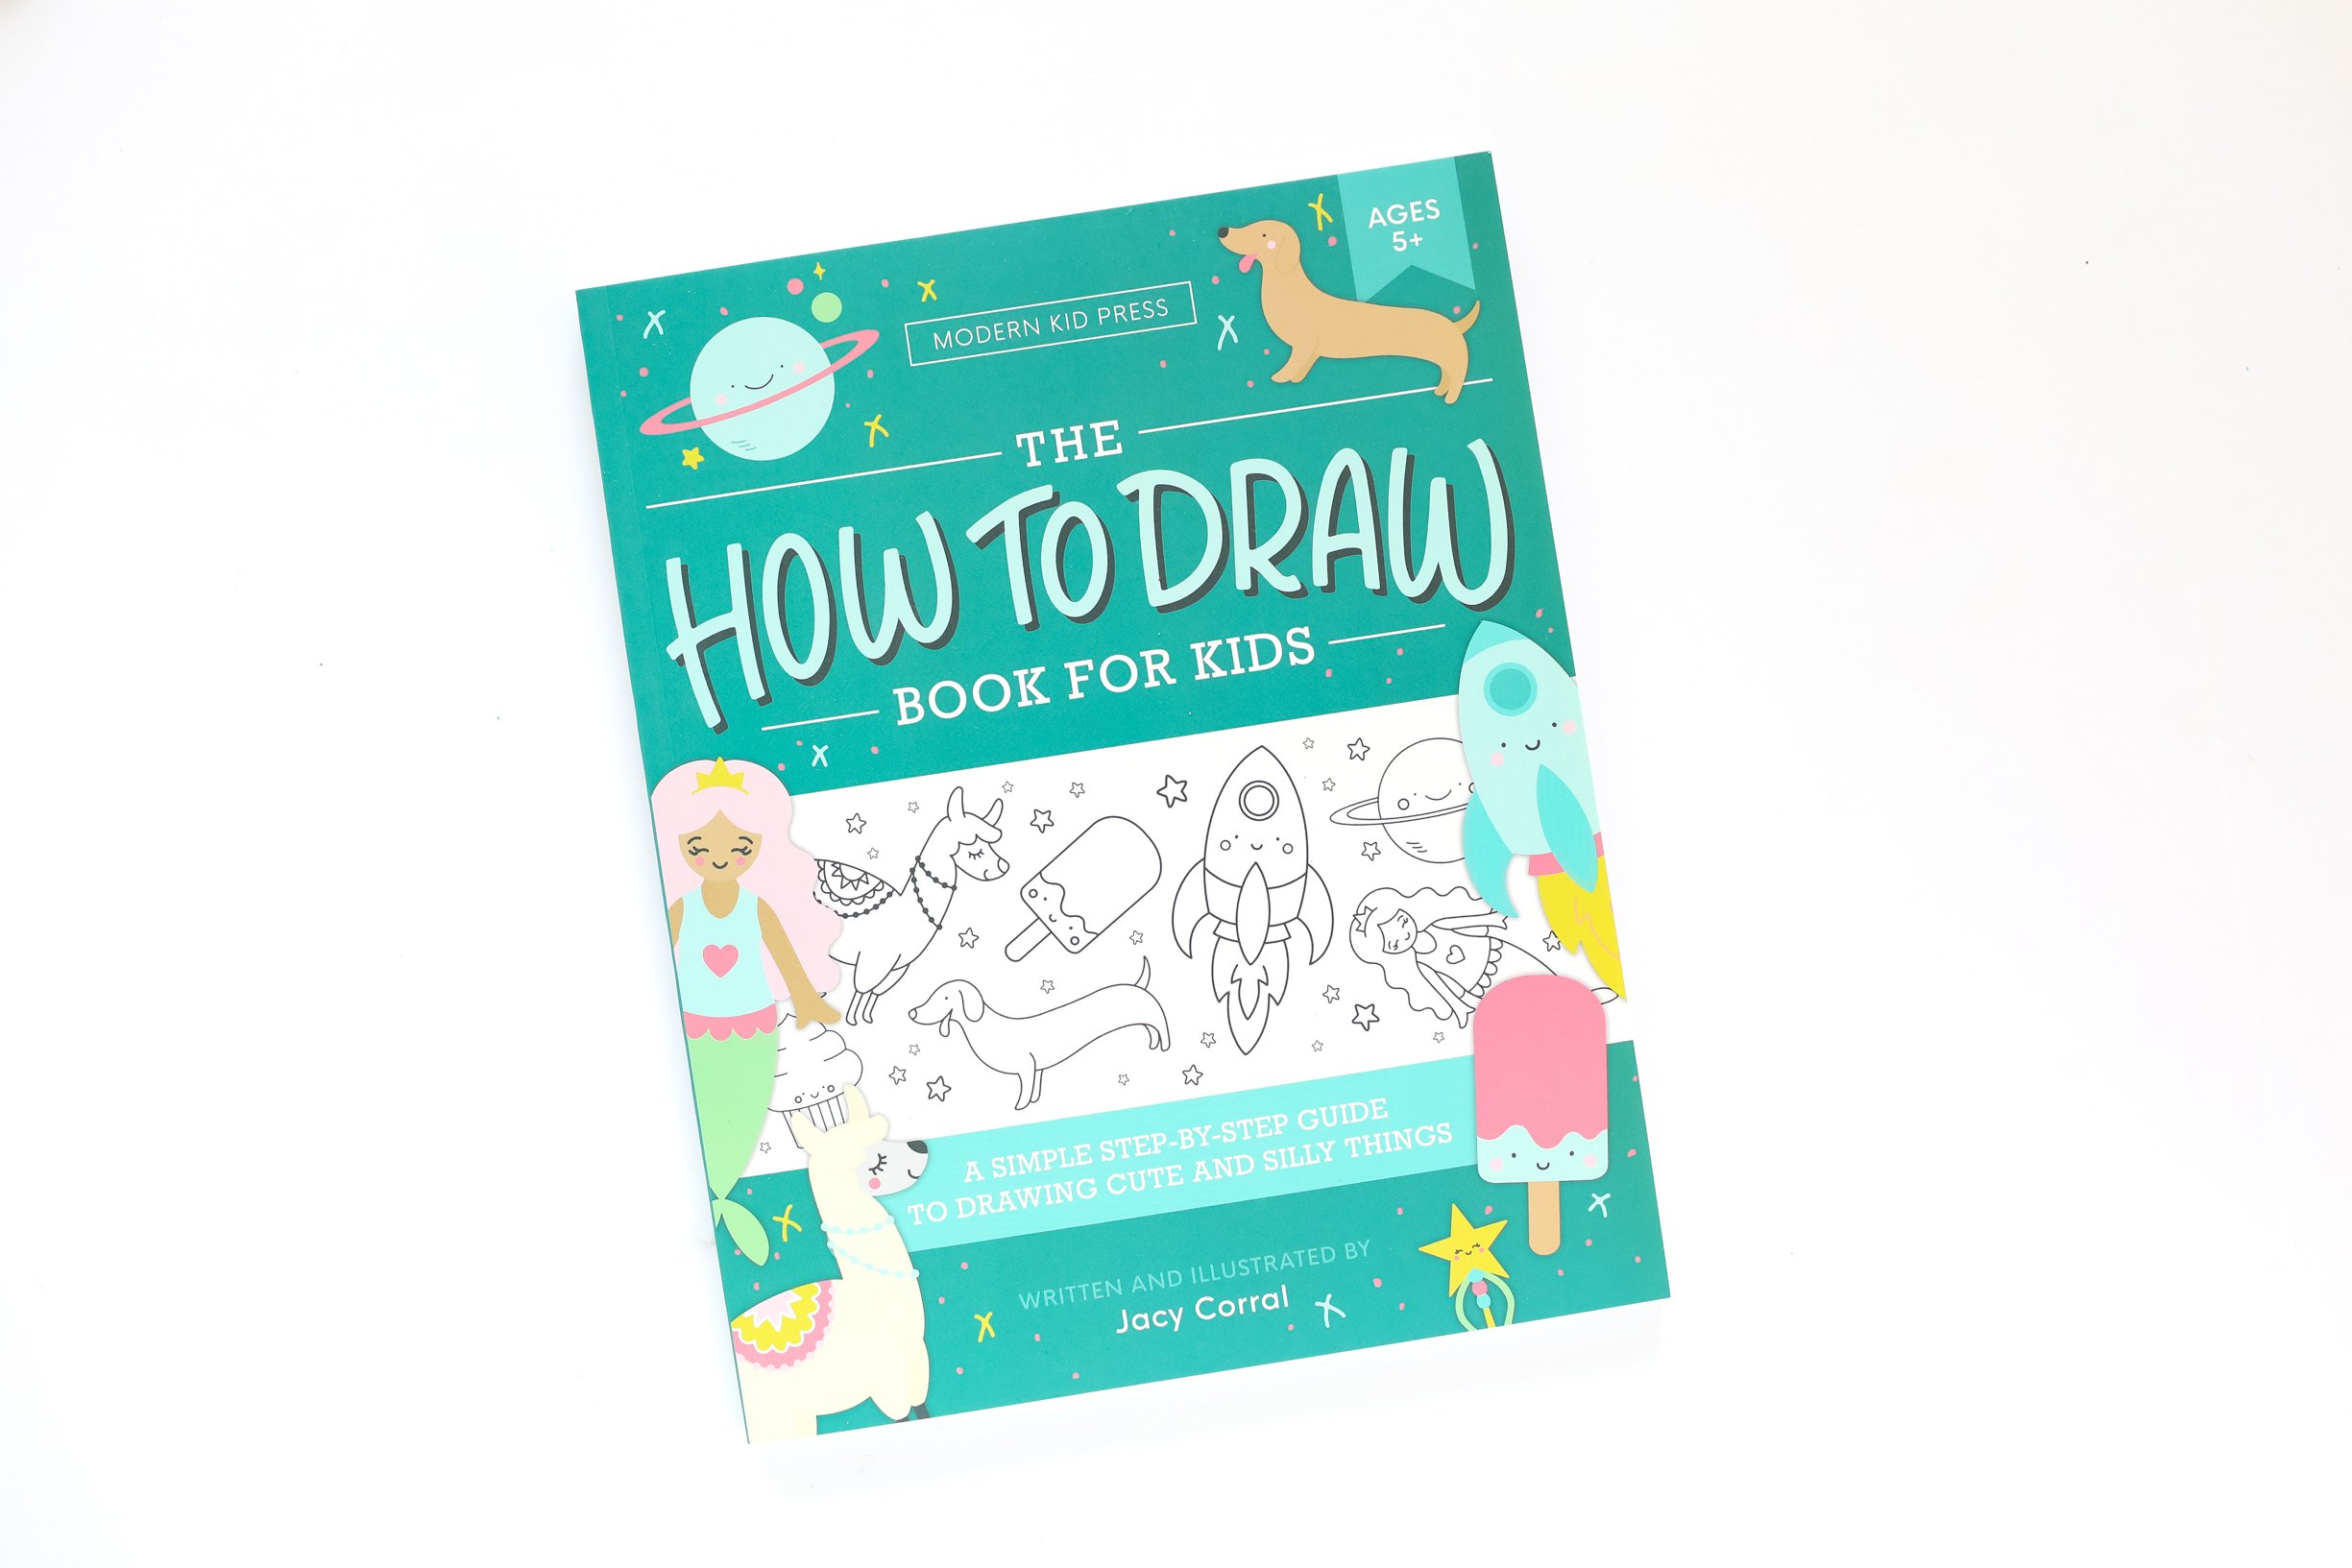 How To Draw Book For Kids: Draw This Not That Fun (Paperback